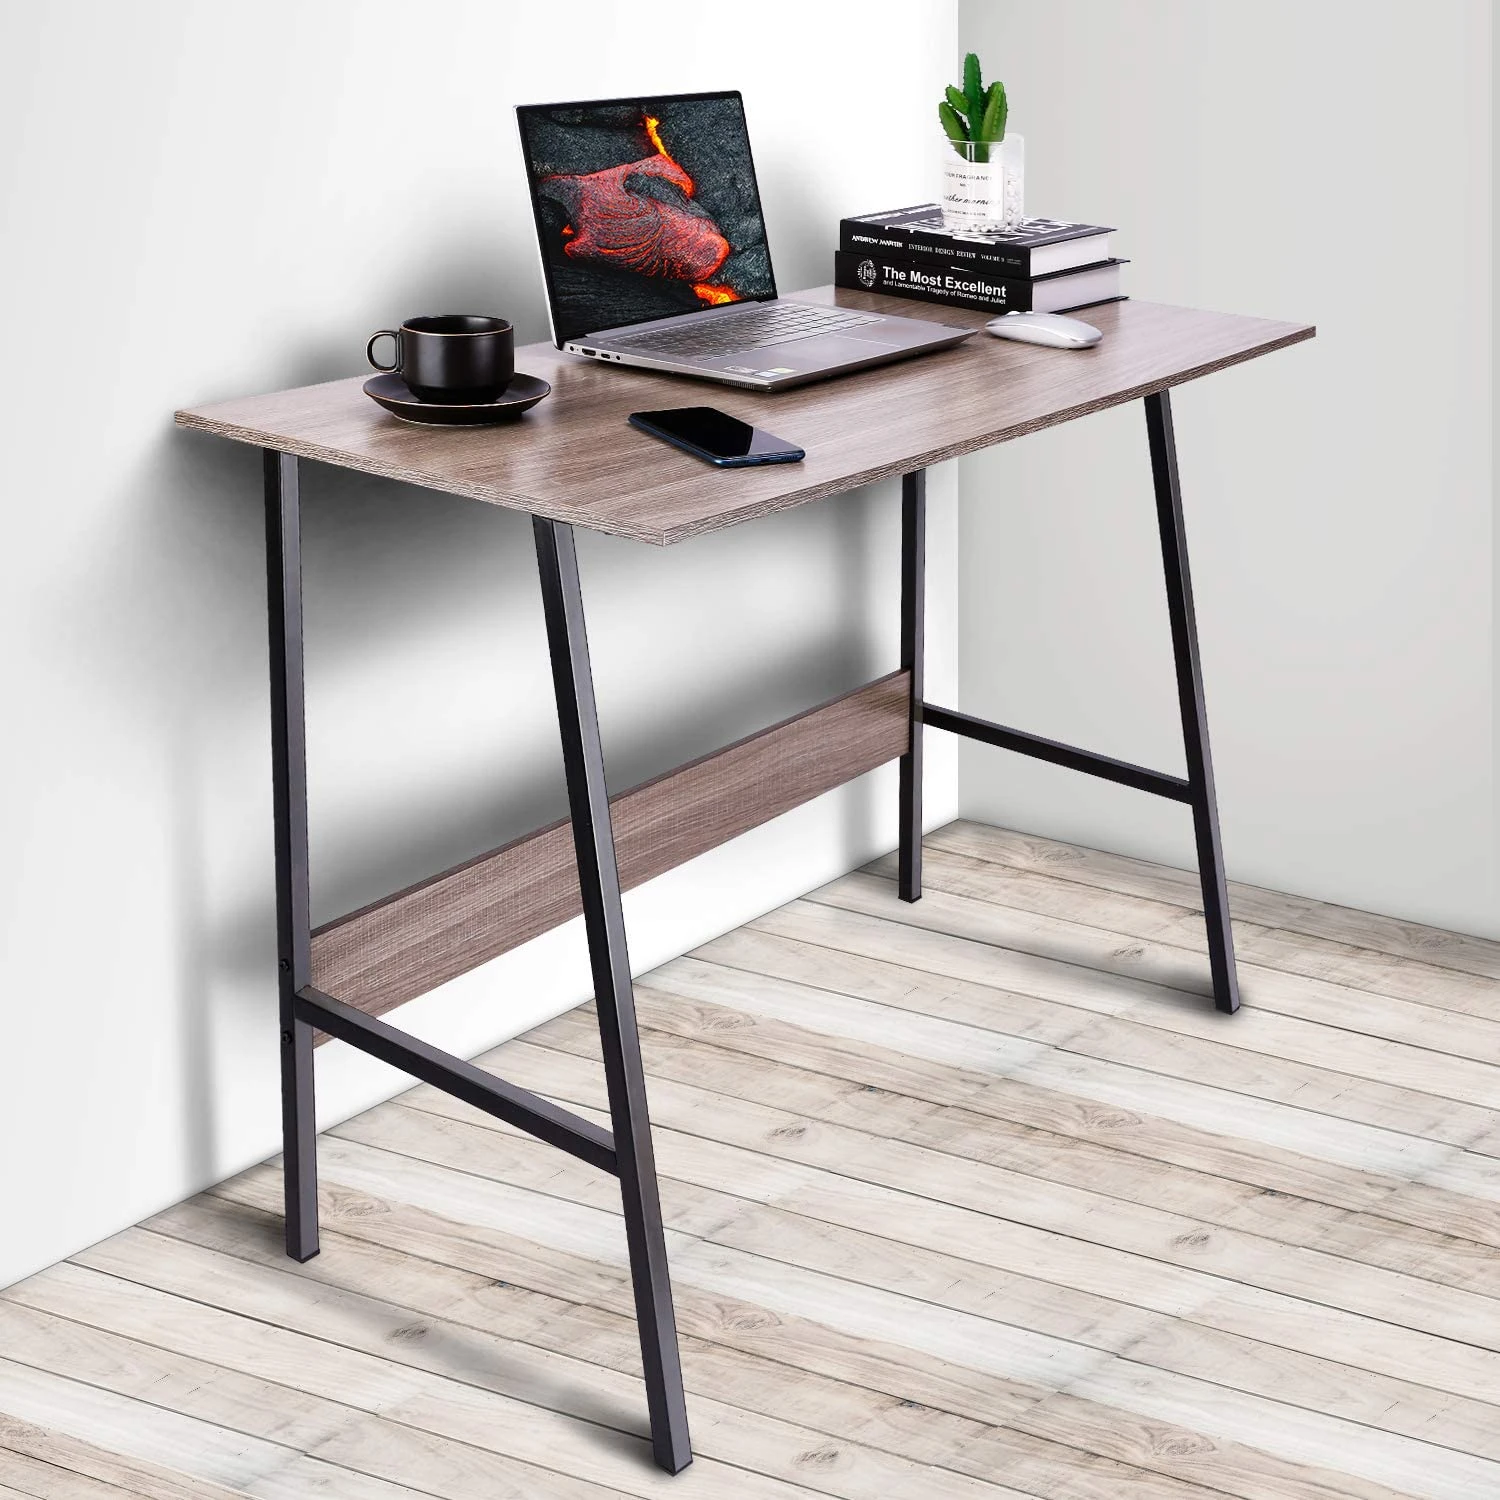 Combohome Laptop Study Table 39" Computer Writing Desk Home Office Desk with Wood Block Support Modern Student Desk Brown